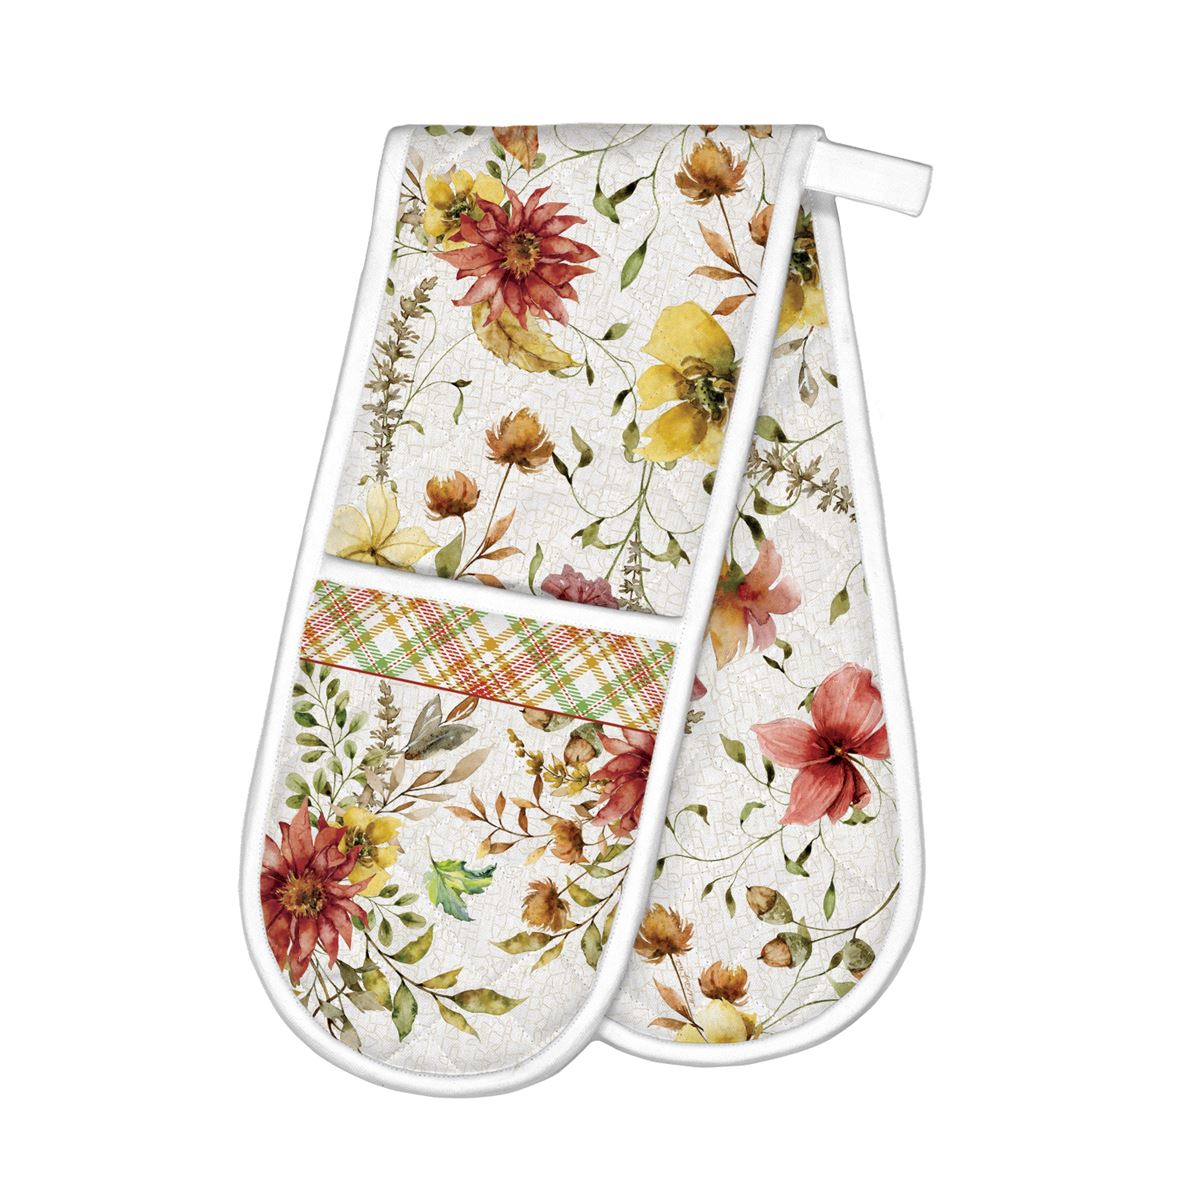 Fall Leaves & Flowers Double Oven Glove